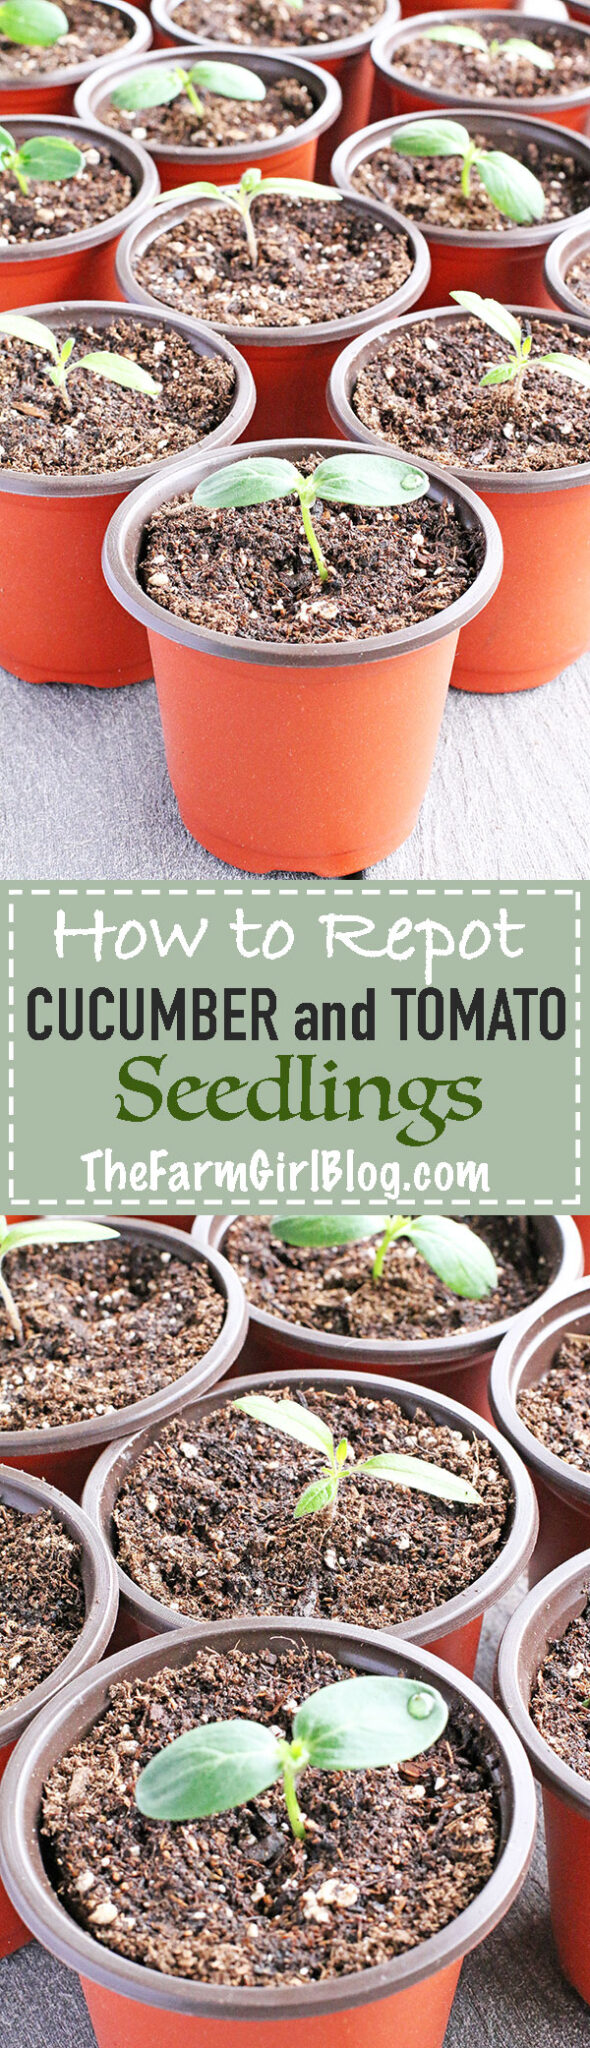 In this post, you will learn How to Repot CUCUMBER and TOMATO Seedlings. It is so easy, fun and rewarding. Nothing can beat homegrown produce, so this is why I love to grow my own backyard garden. Even though you can purchase fresh produce at the farmers market, but I can be sure no chemical will be used if I grow my own garden. 